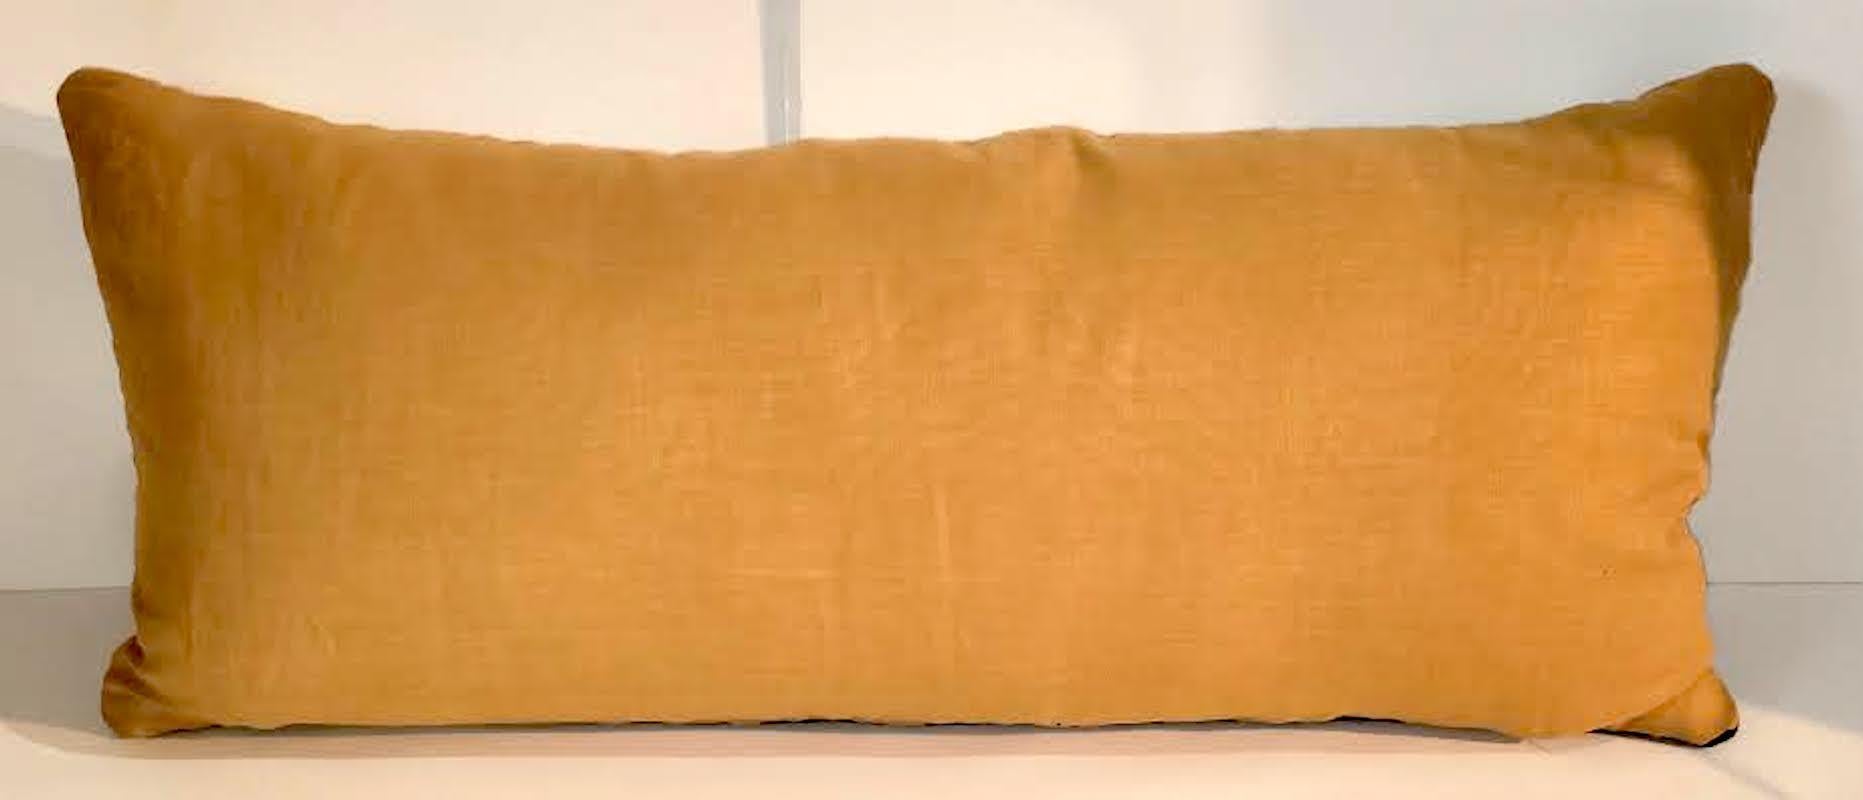 20th Century Indian Weaving Bolster Pillow For Sale